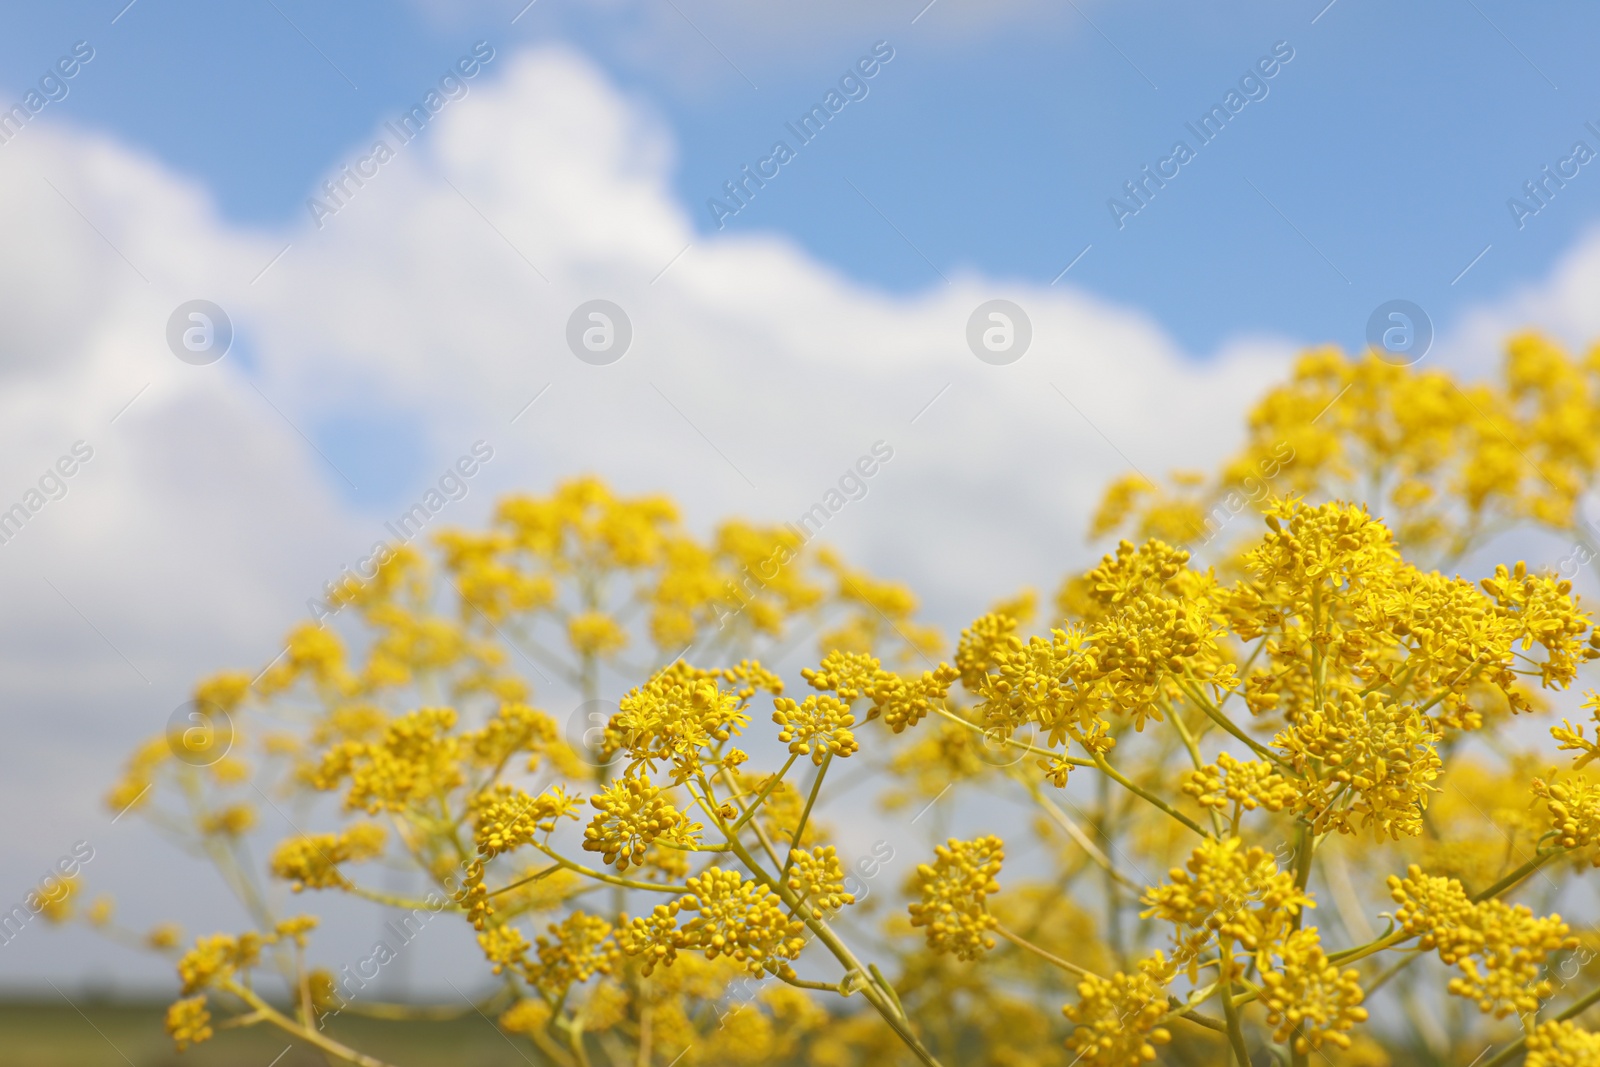 Photo of Closeup view of plant with yellow blossom outdoors